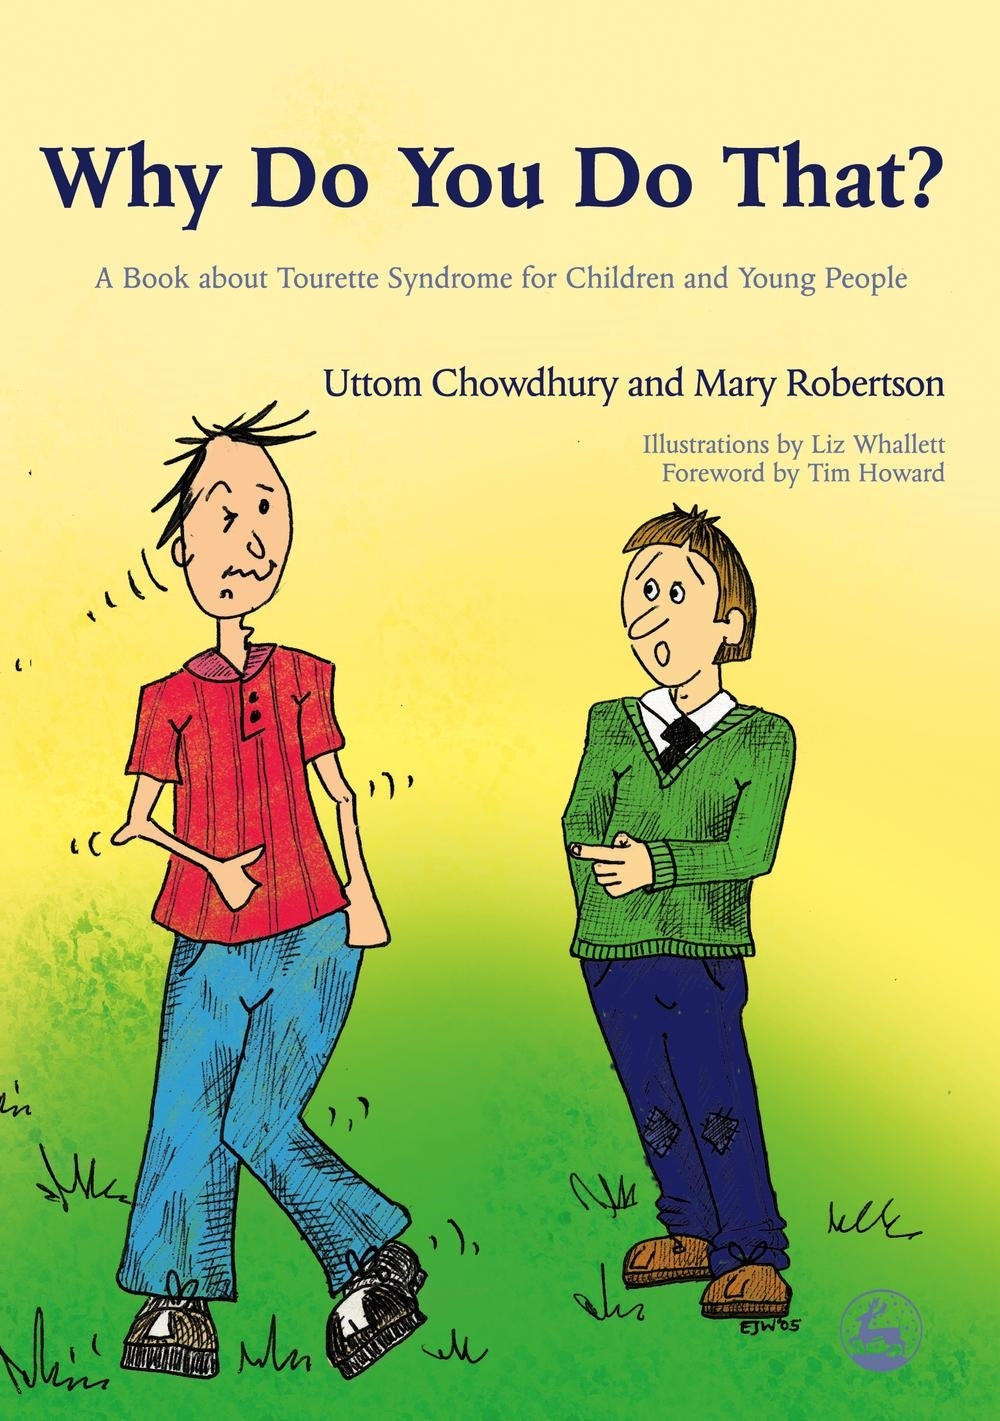 Why Do You Do That? by Uttom Chowdhury, Mary Robertson